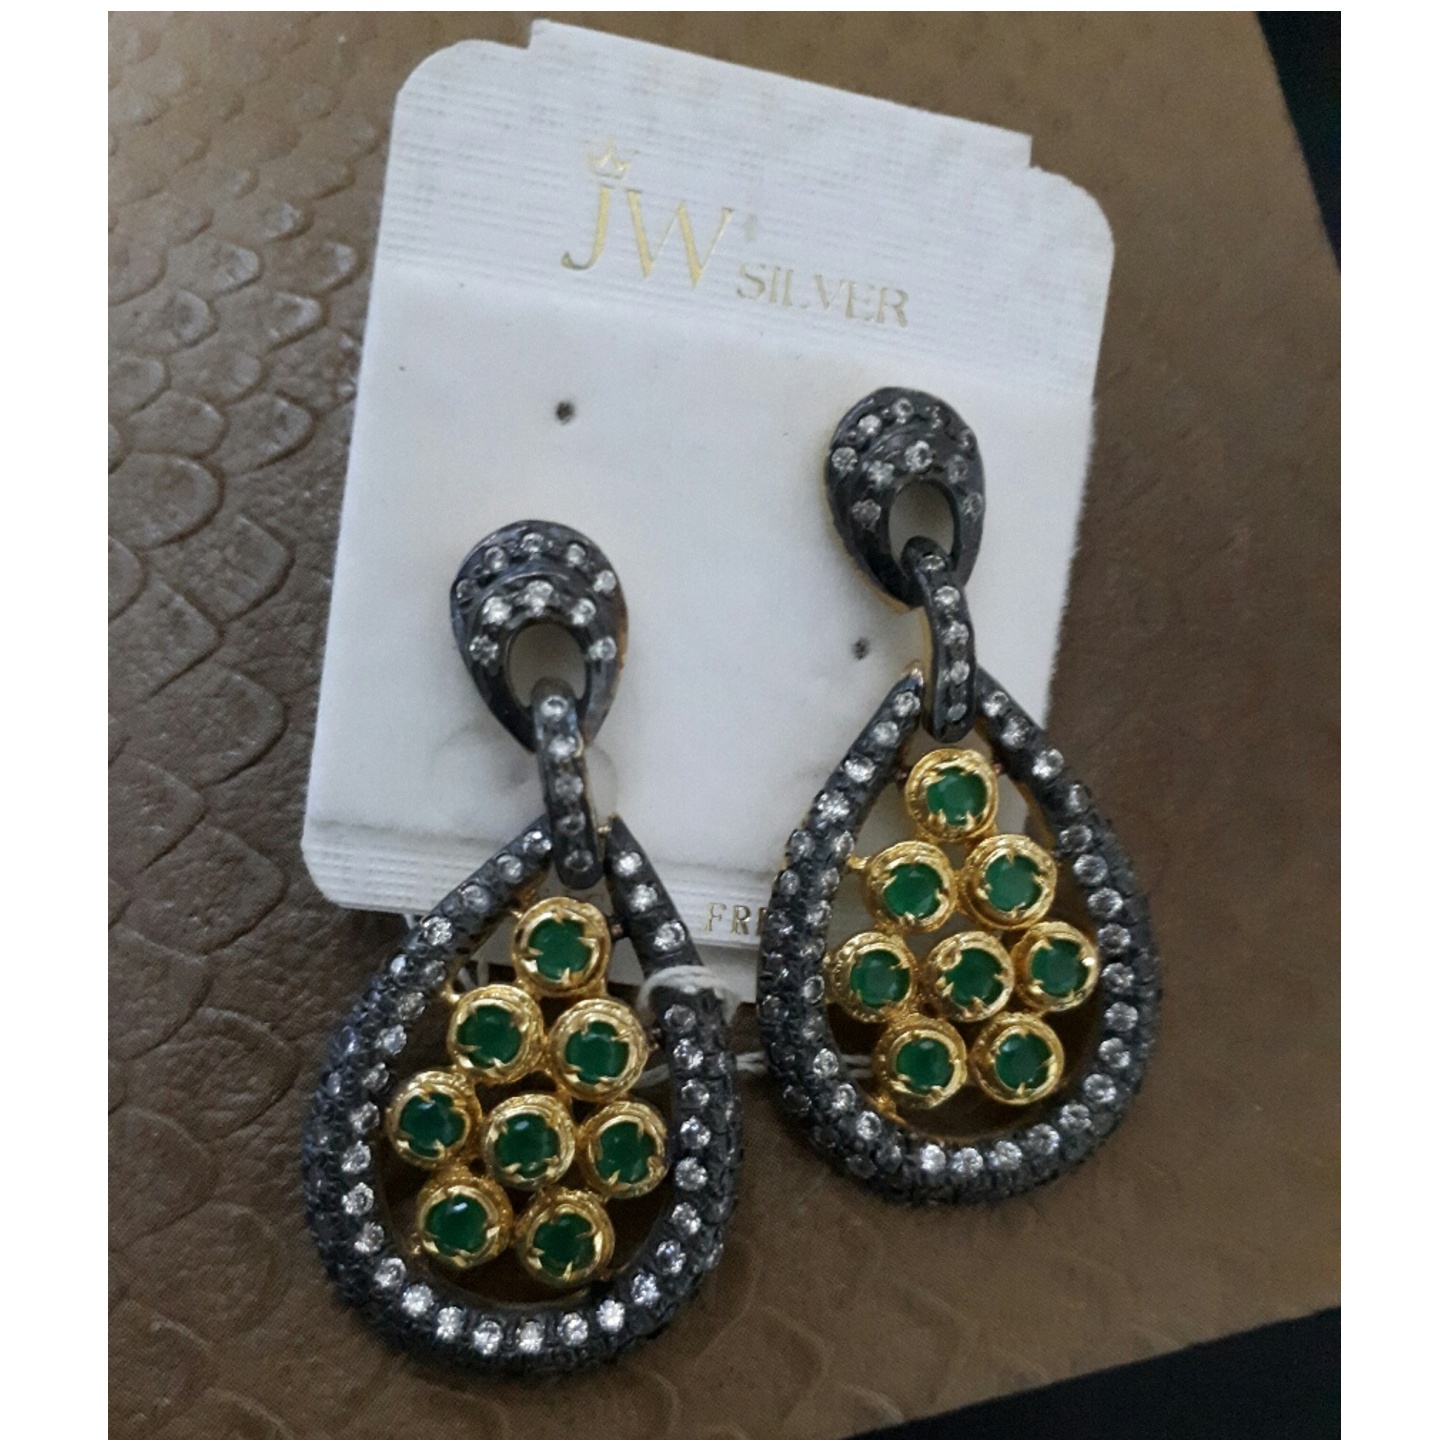 American Diamond Earrings with green crystals